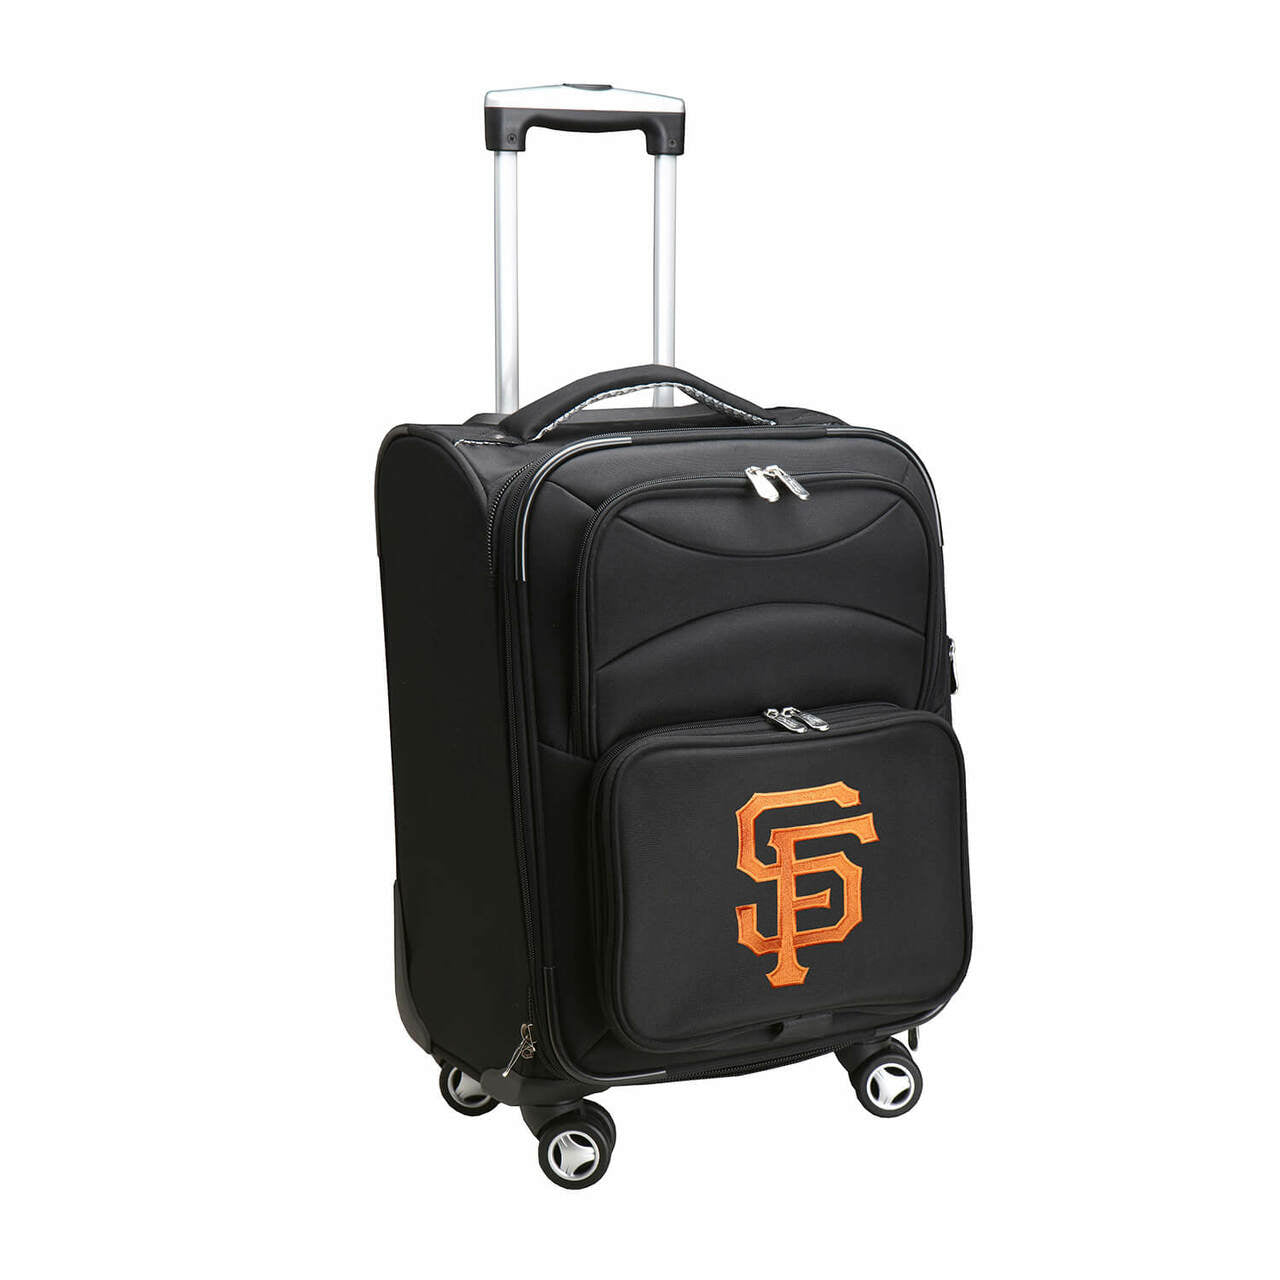 Giants Luggage | San Francisco Giants 20" Carry-on Spinner Luggage